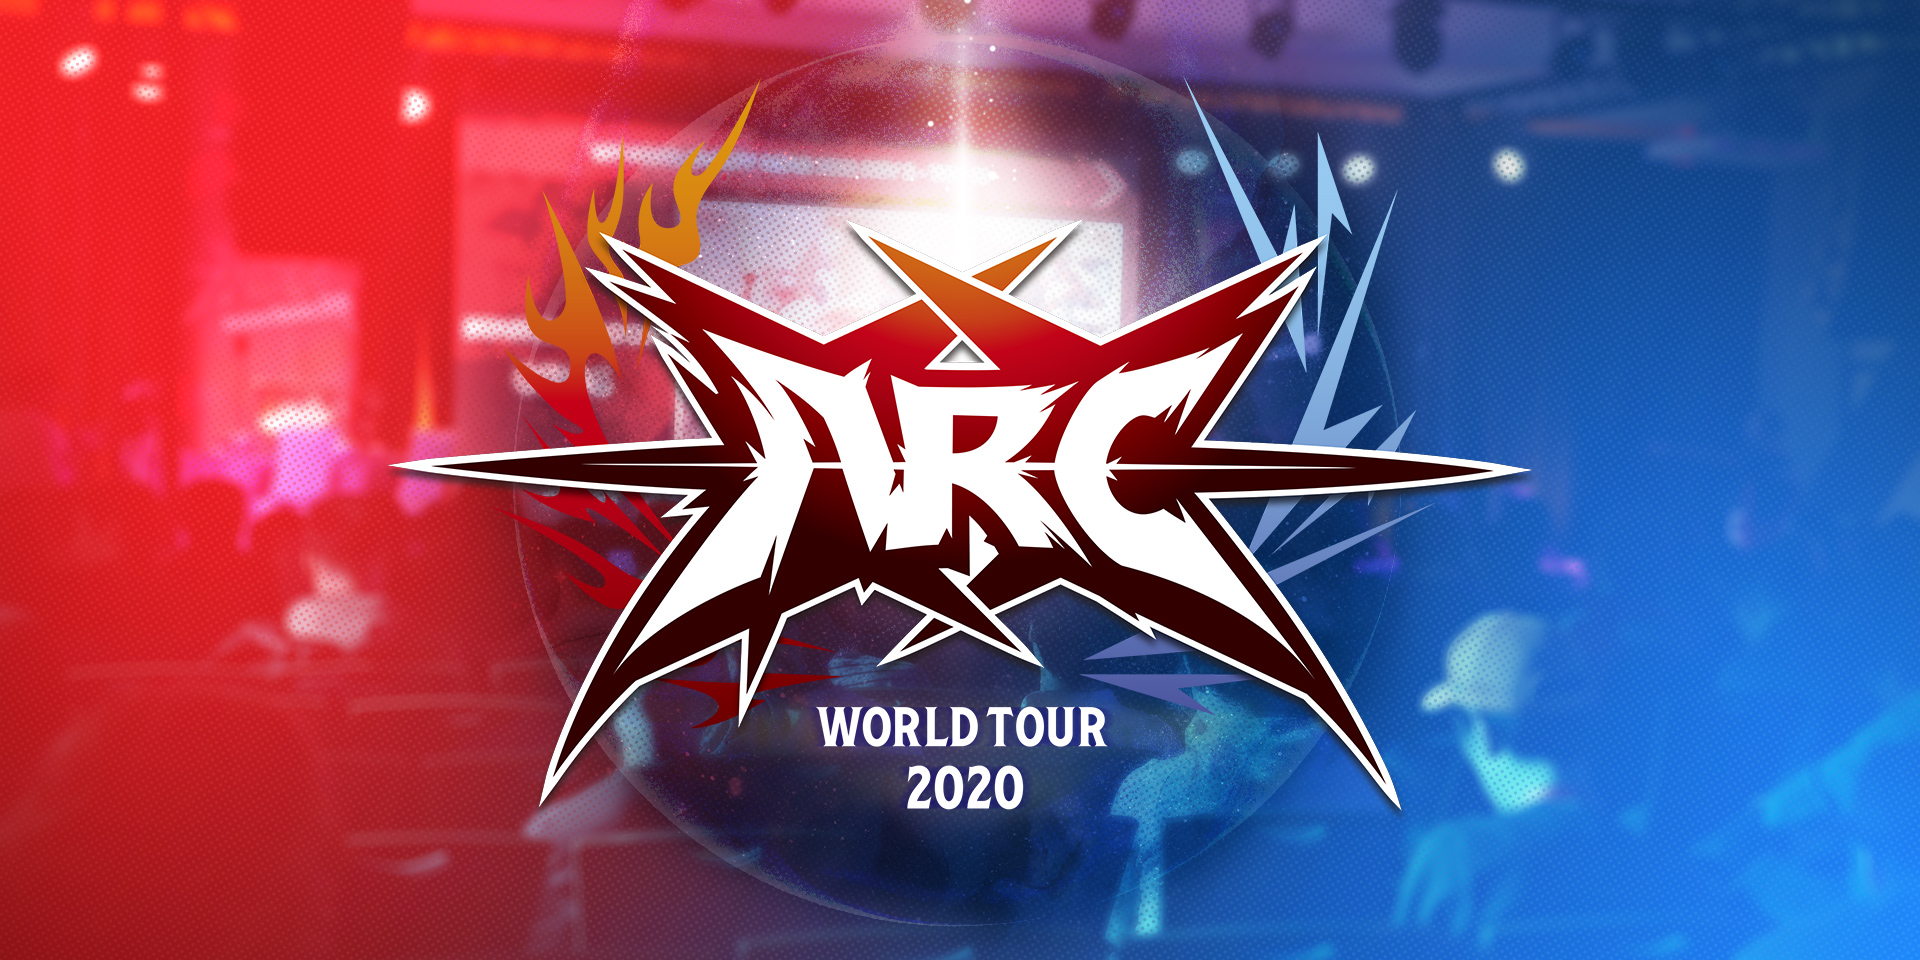 ARC WORLD TOUR and EVO joining forces in 2020!